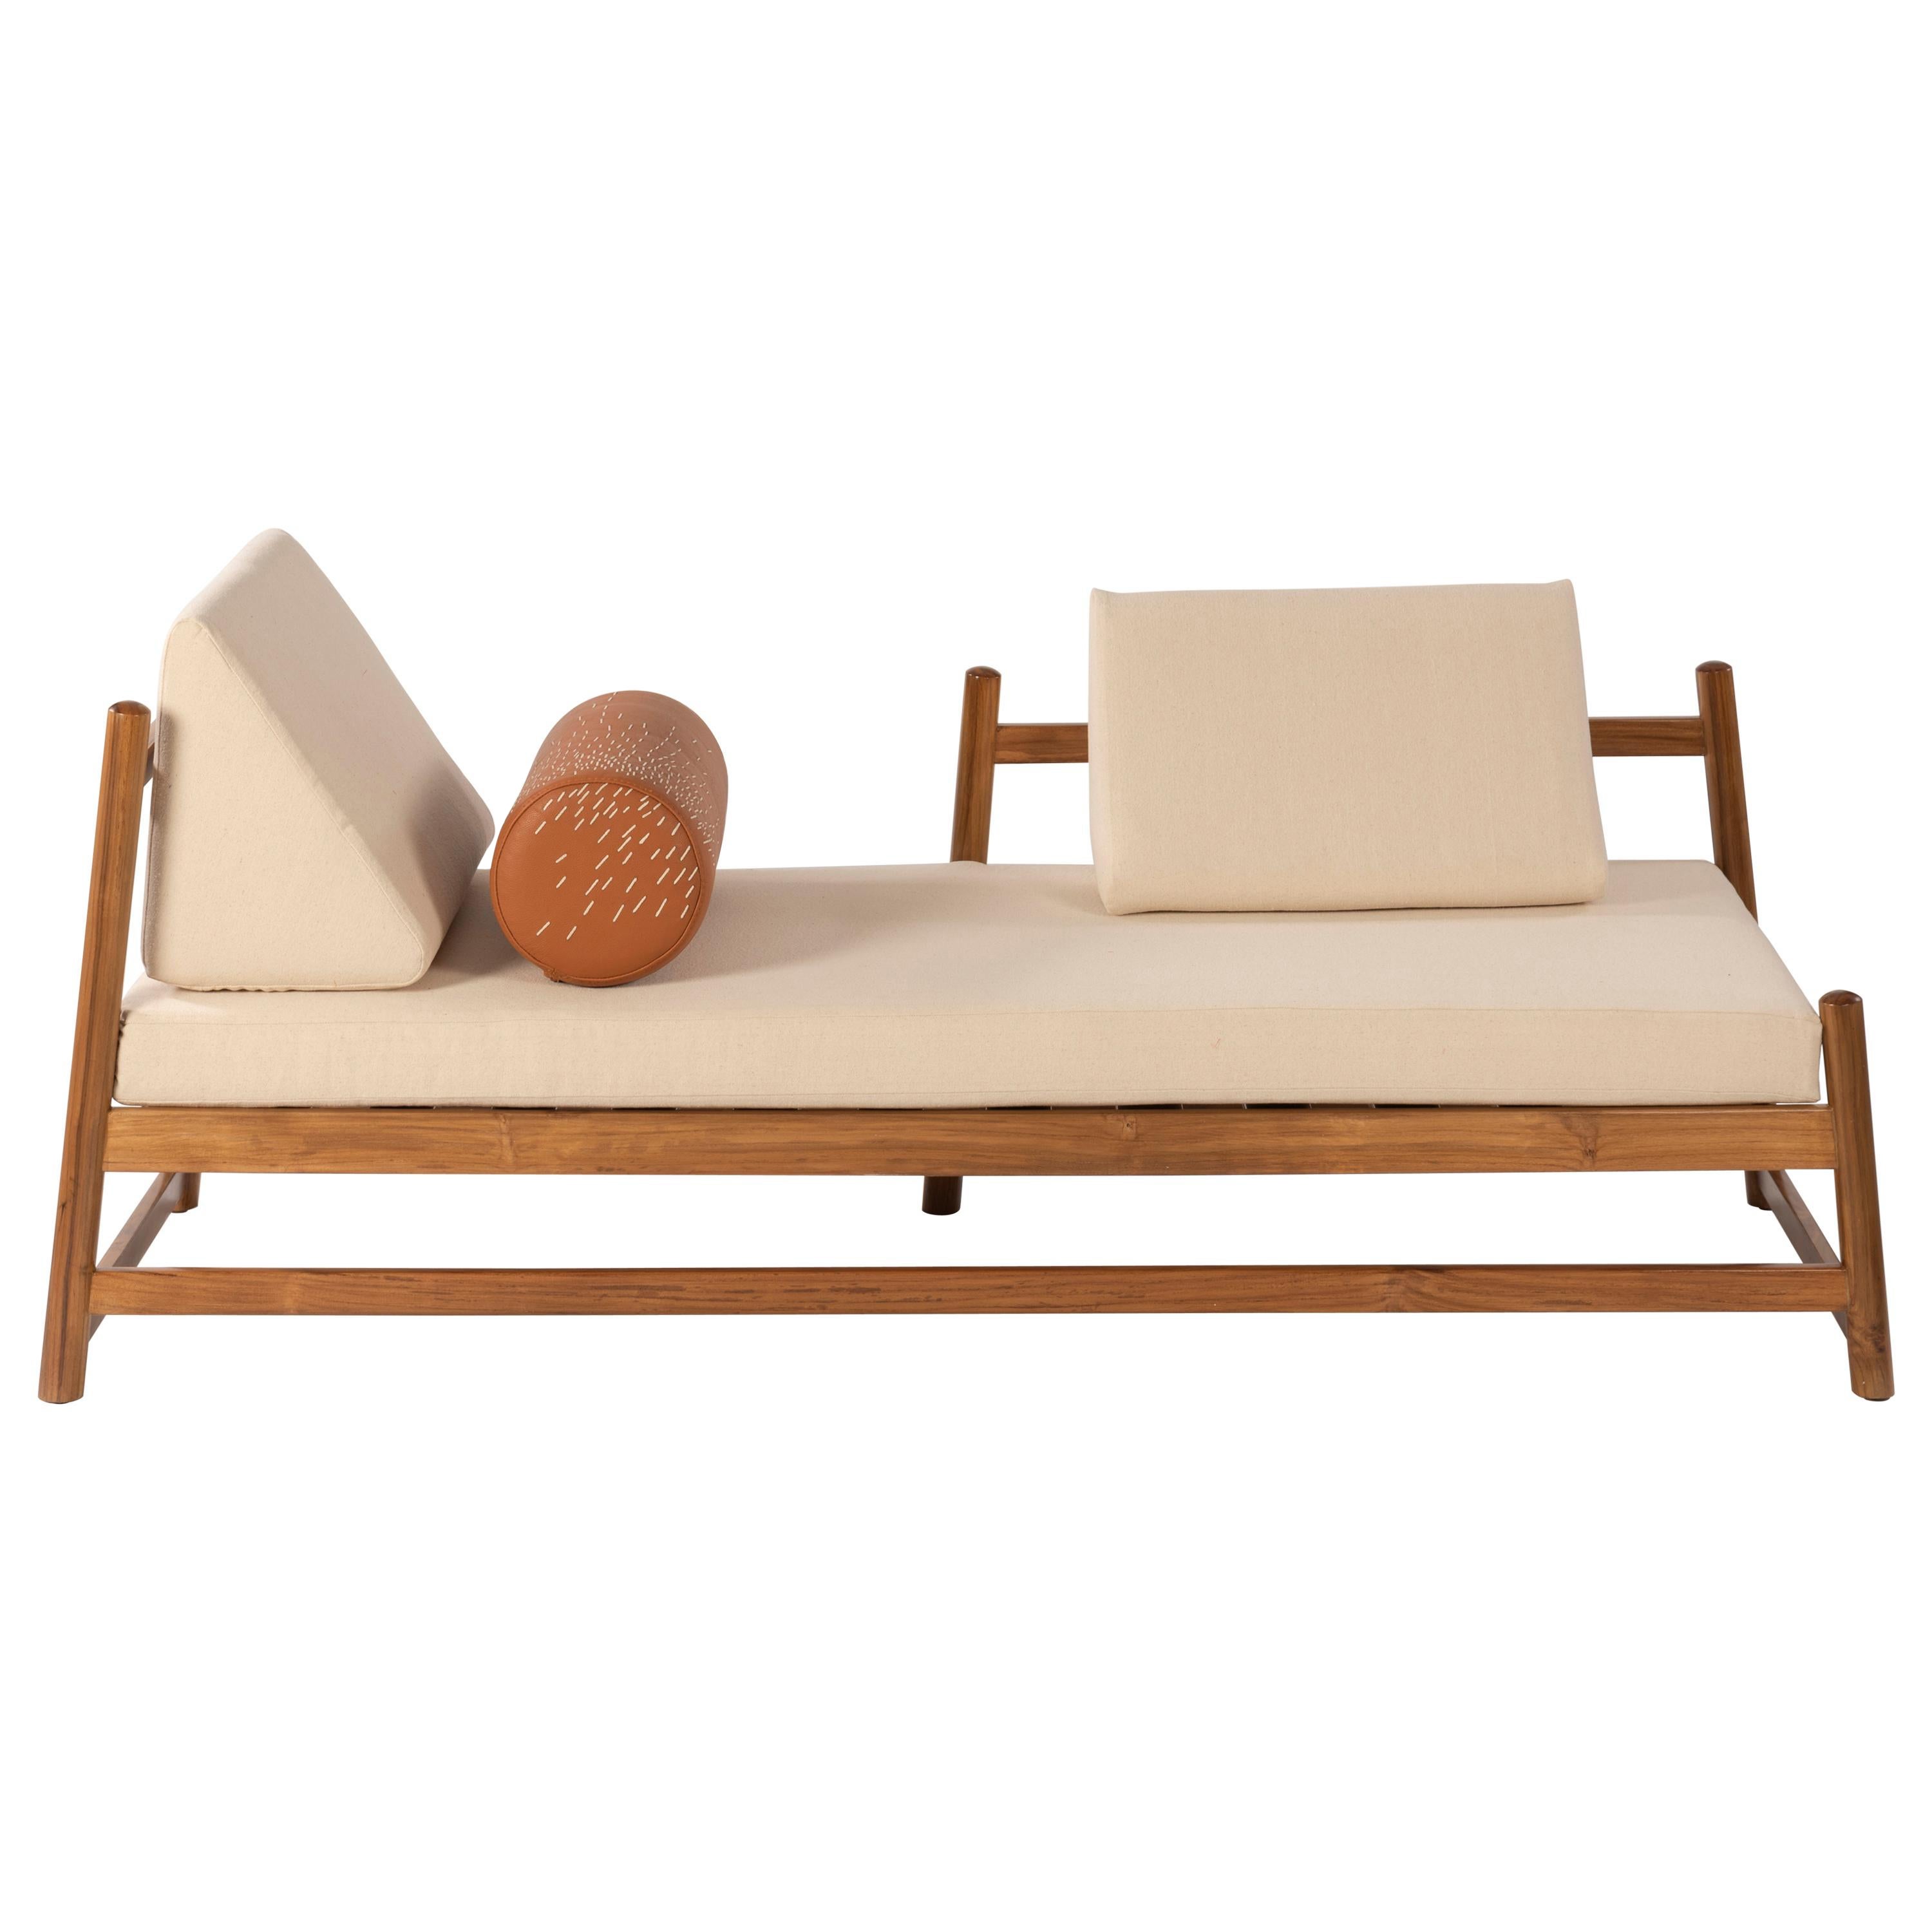 Pita Outdoors Daybed, Teak Wood, Sunbrella and Leather For Sale